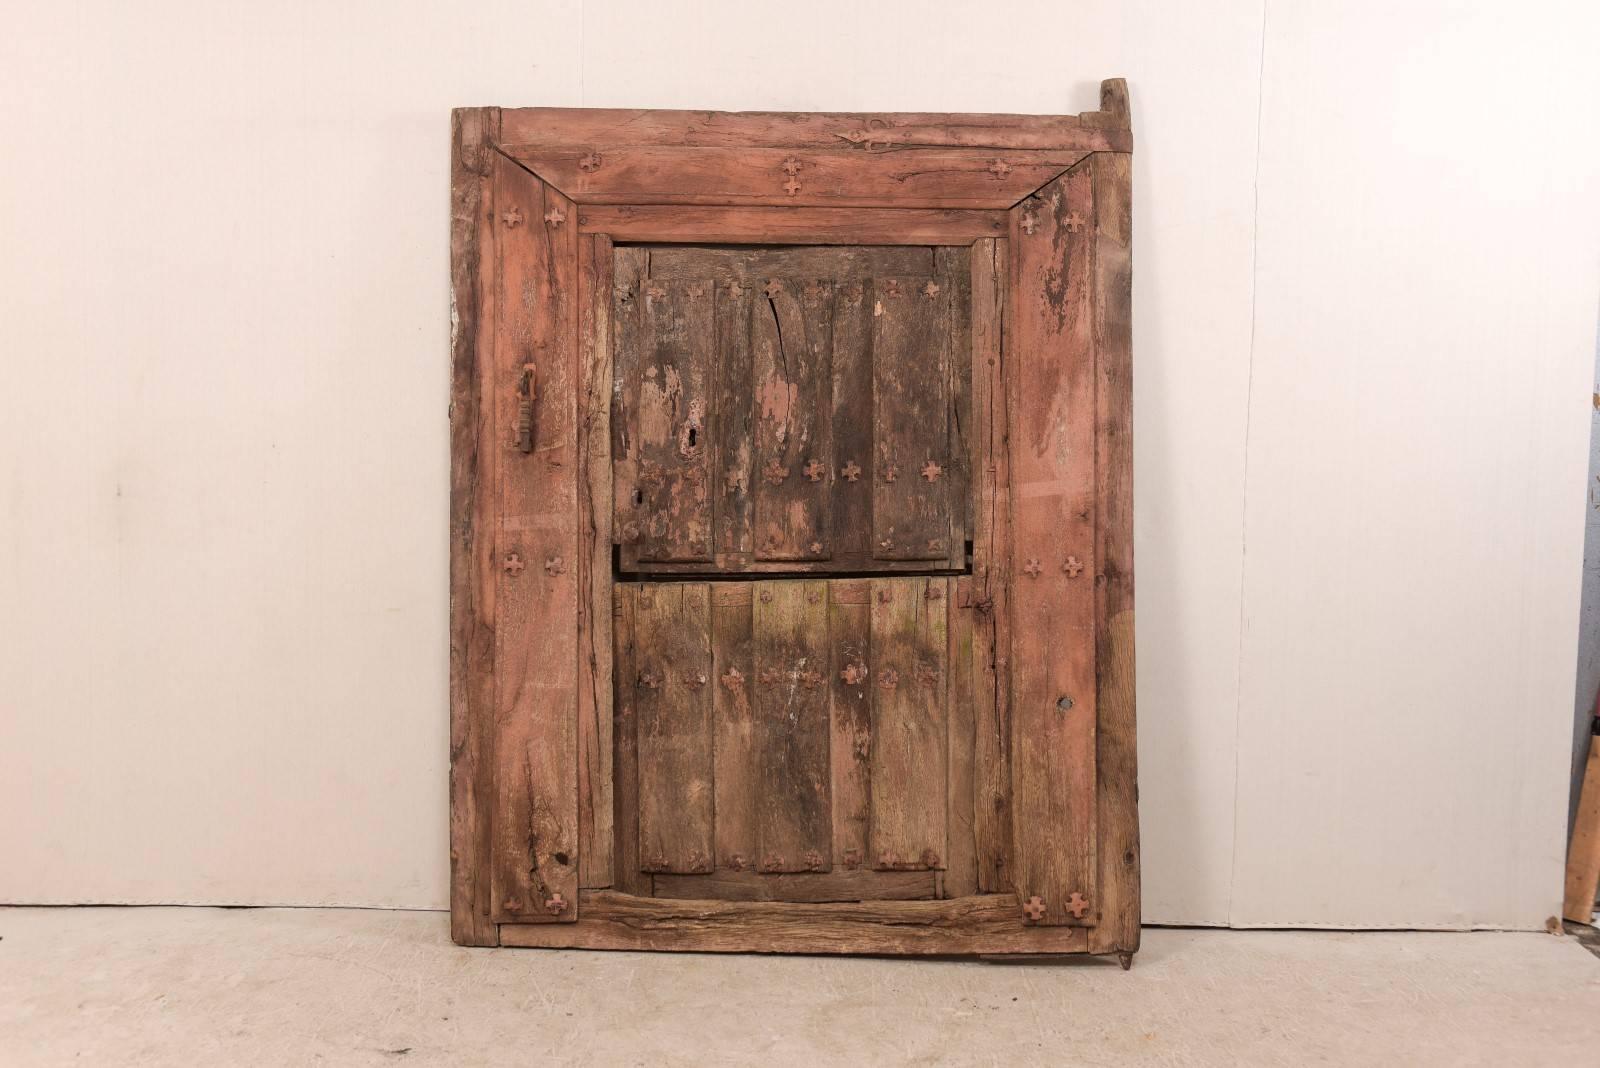 A Spanish 18th century split-door within it's original casing. This antique architectural piece from Spain features a shorter, half door (similar to a Dutch style door, split horizontally at it's center) set within the original casing. This piece